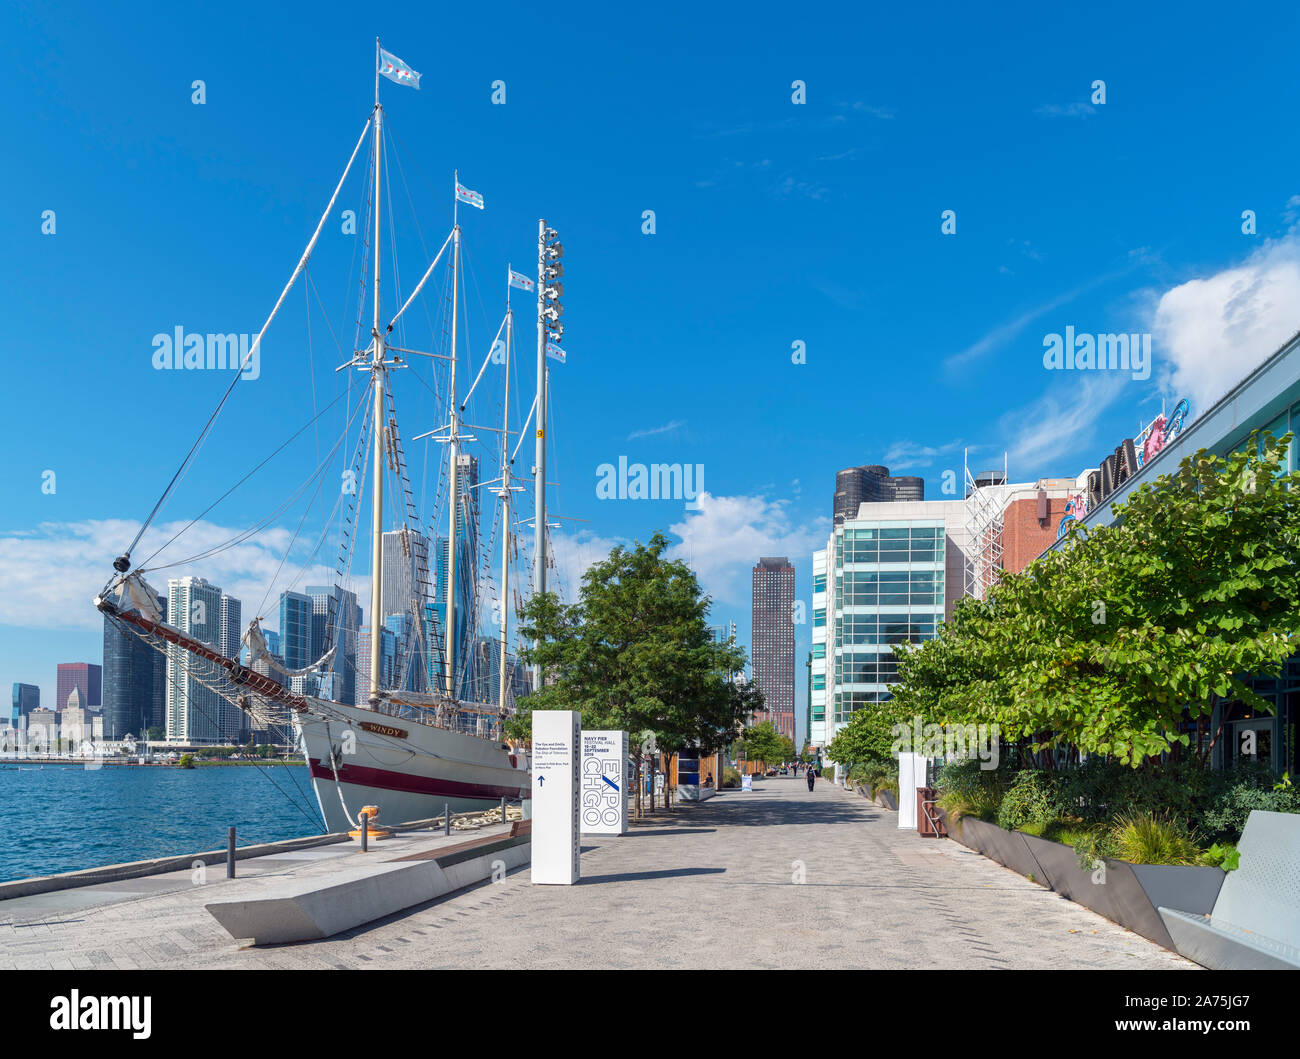 The Chicago skyline from Navy Pier with the sailing ship Windy in the foreground, Chicago, Illinois, USA. Stock Photo